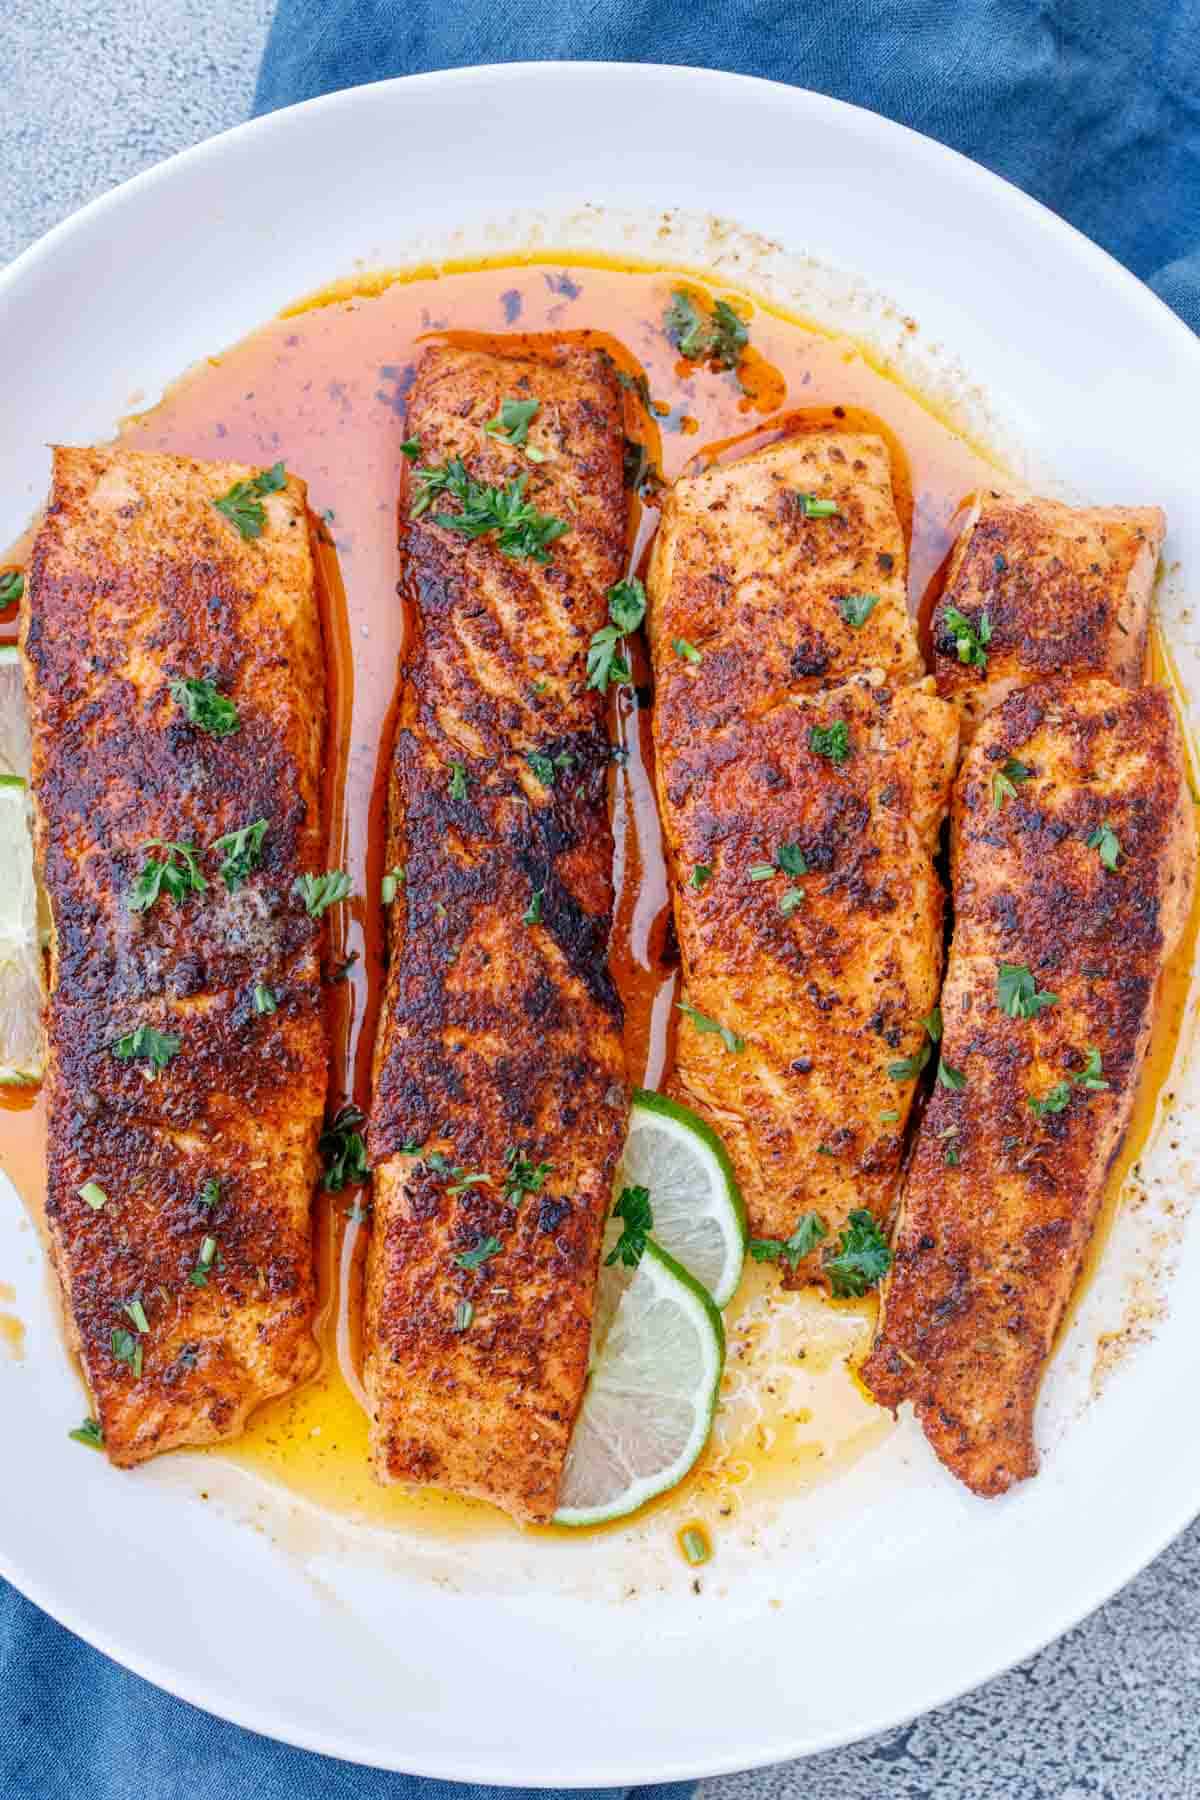 Blackened salmon fillets arranged next to each other on a plate.